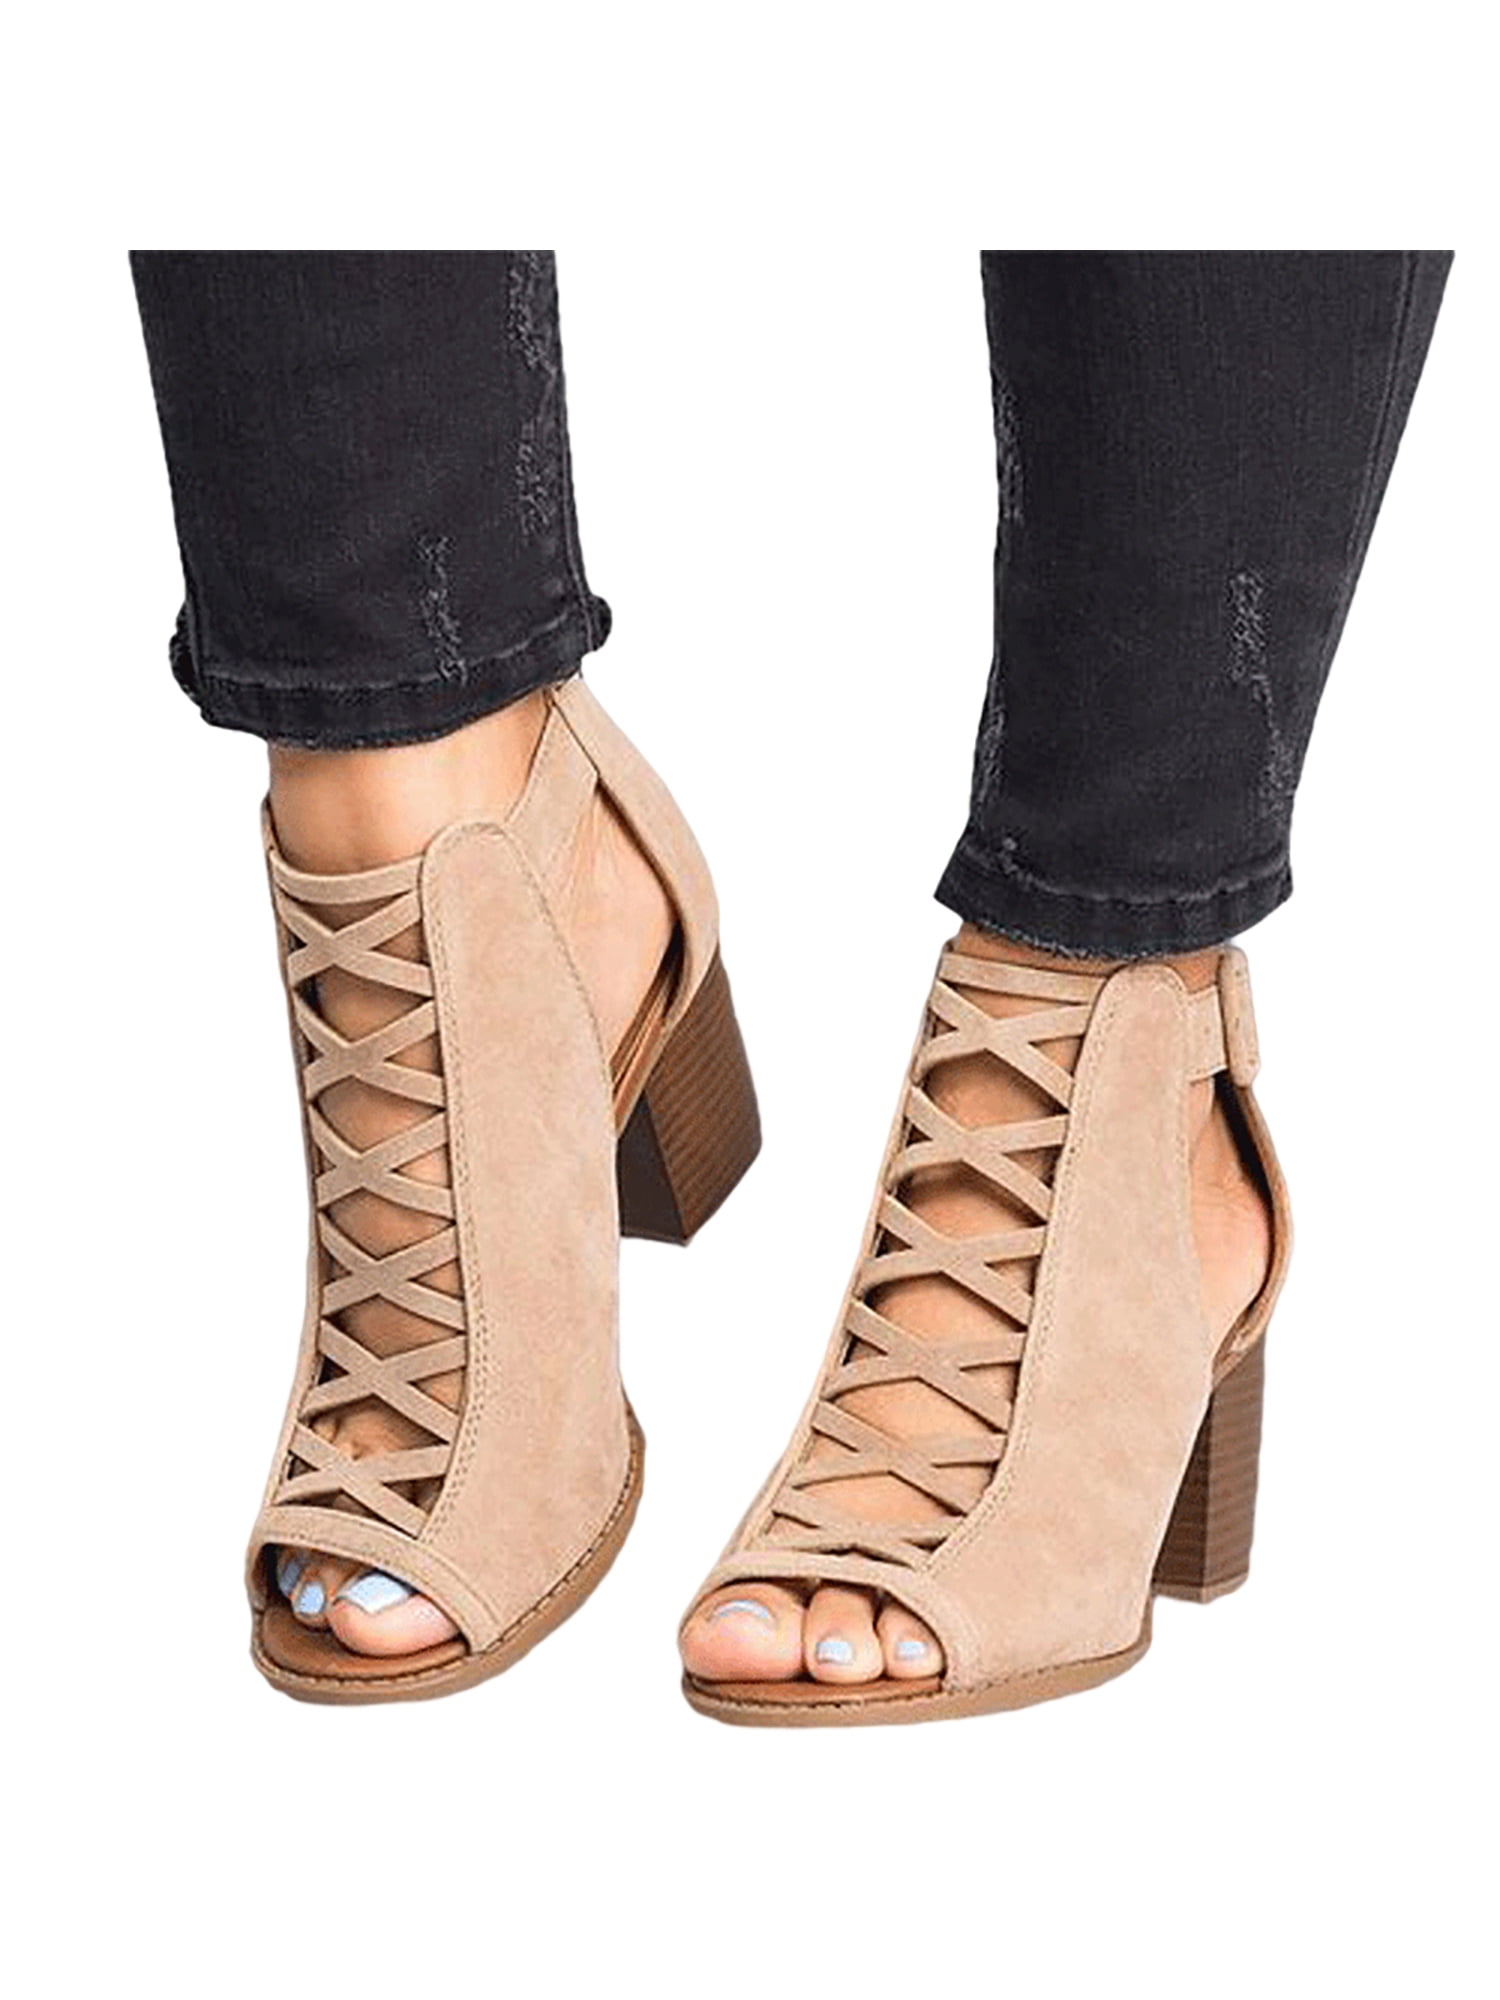 Women Ladies Platform Chunky Block High Heels Boot Ankle Strap Sandals Shoes